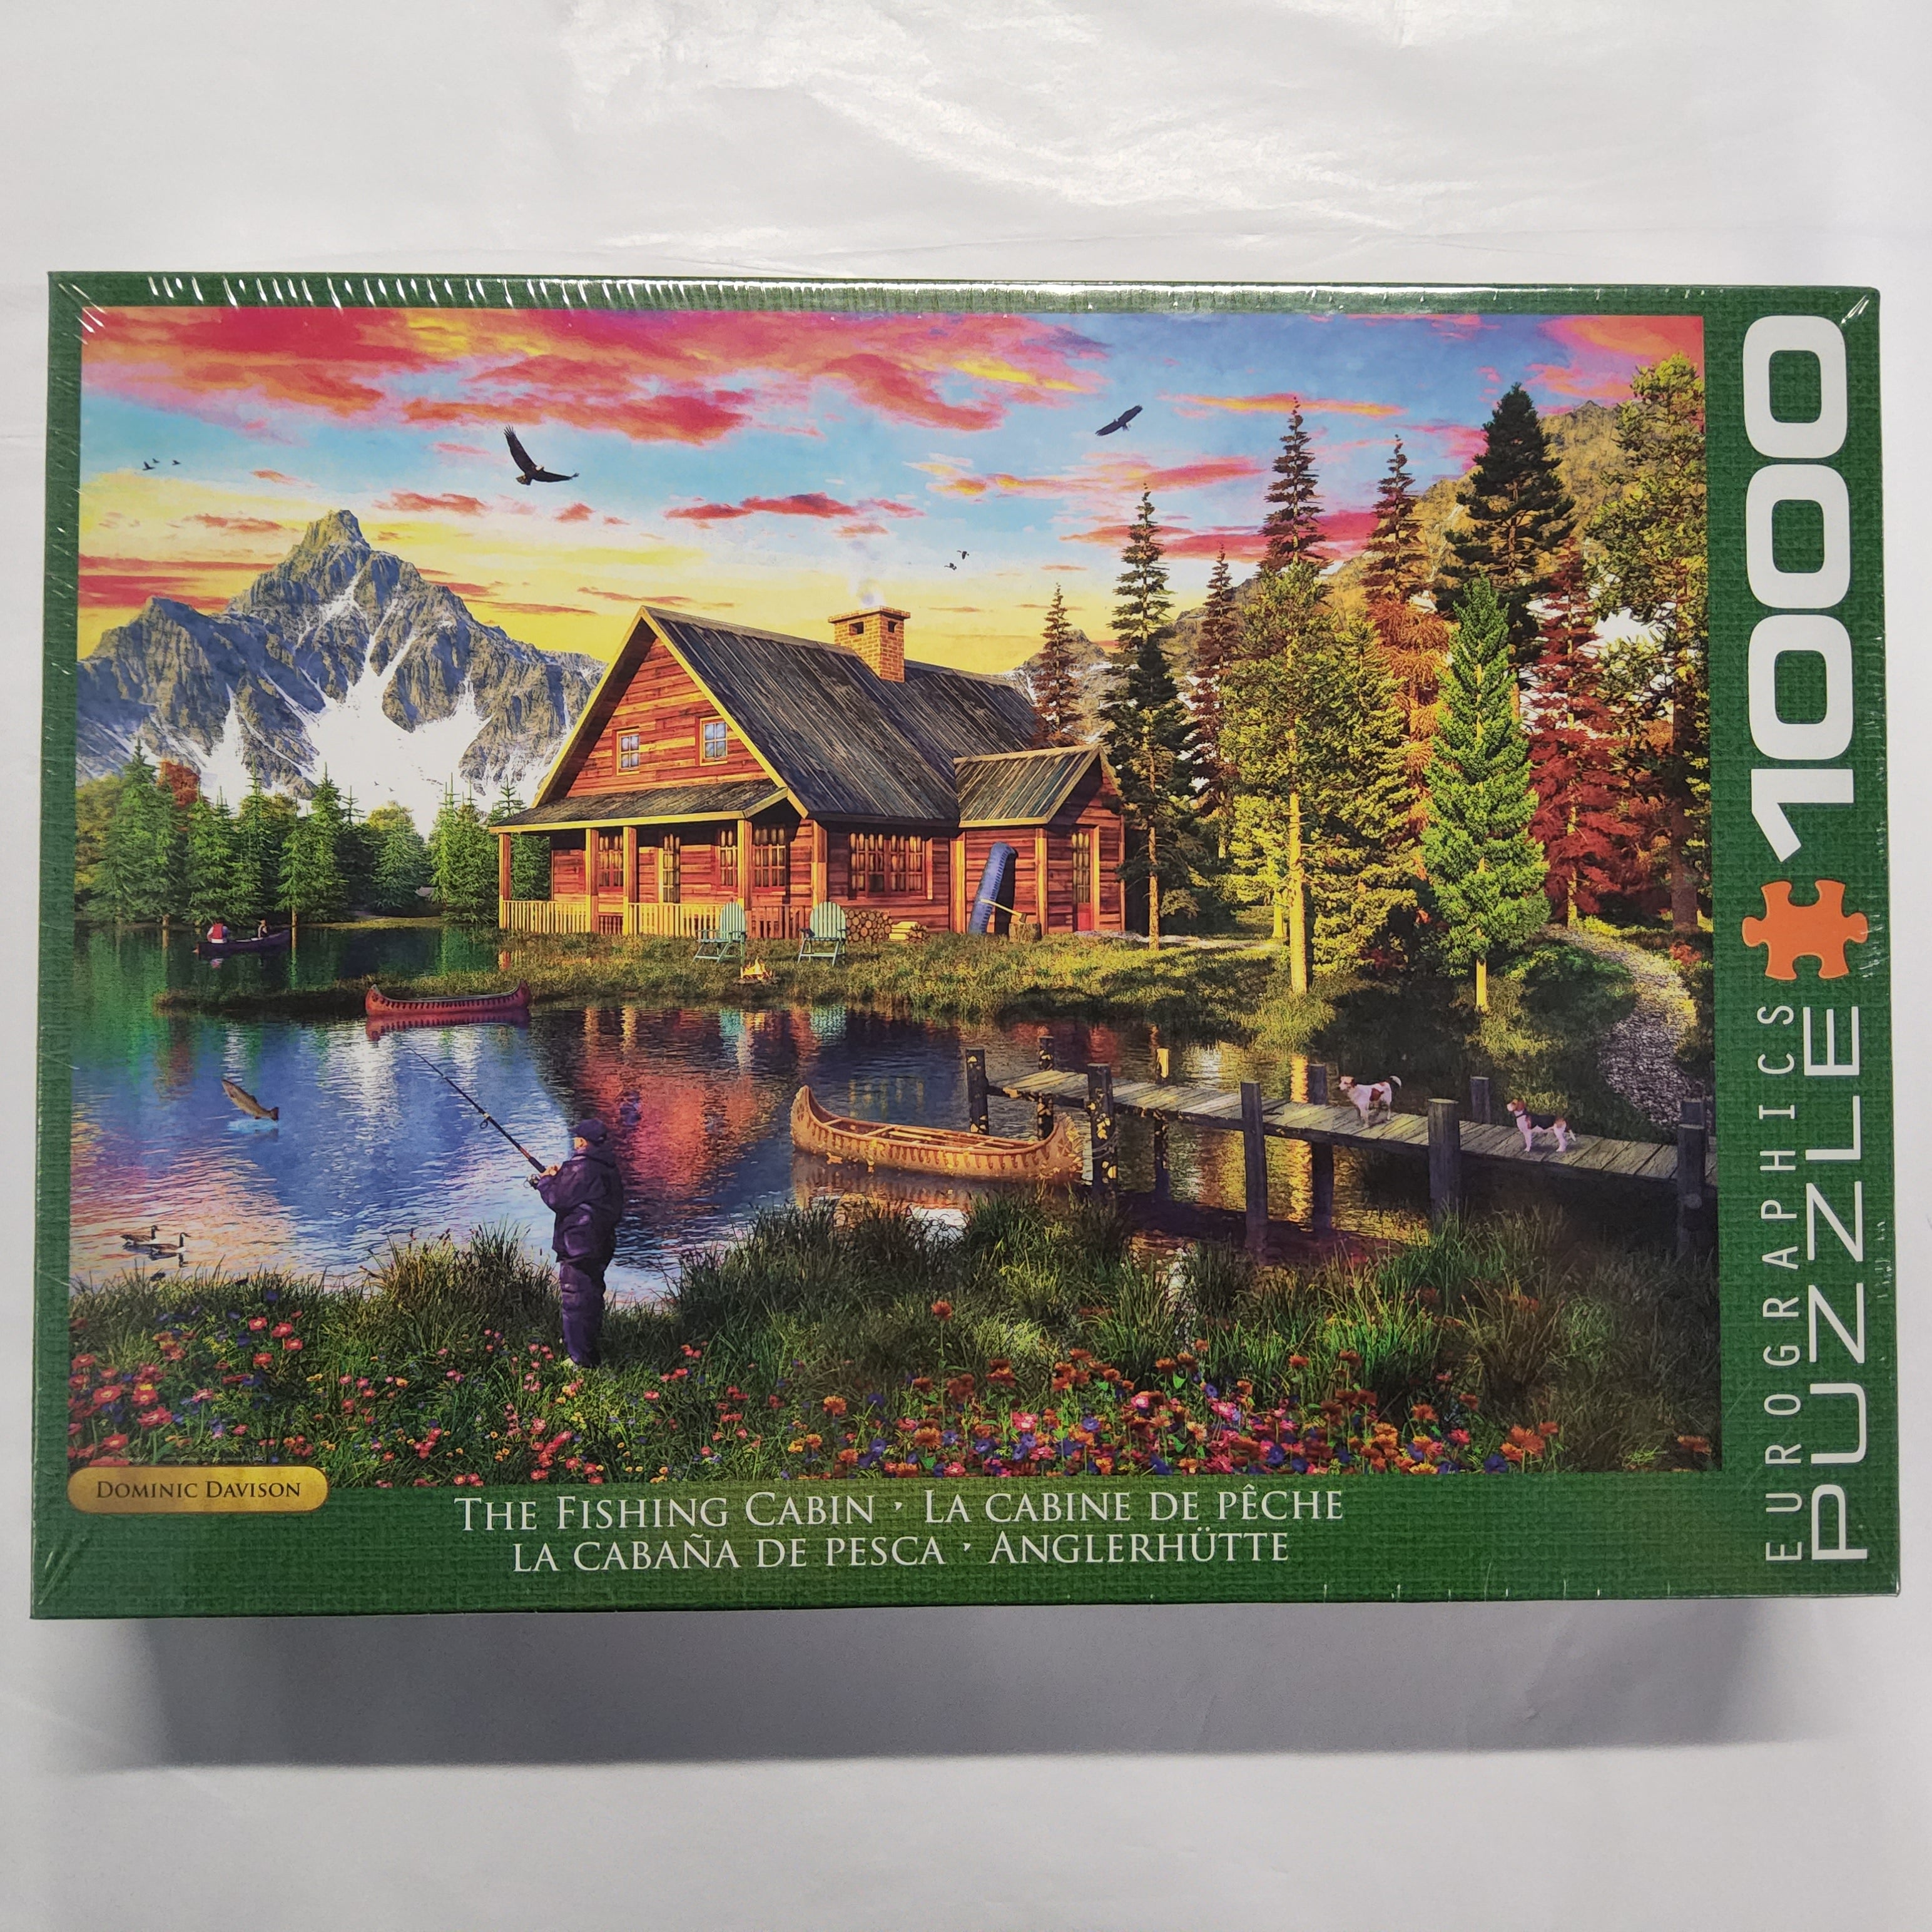 Eurographics Puzzle - The Fishing Cabin - 1000 pieces - 6000-5376